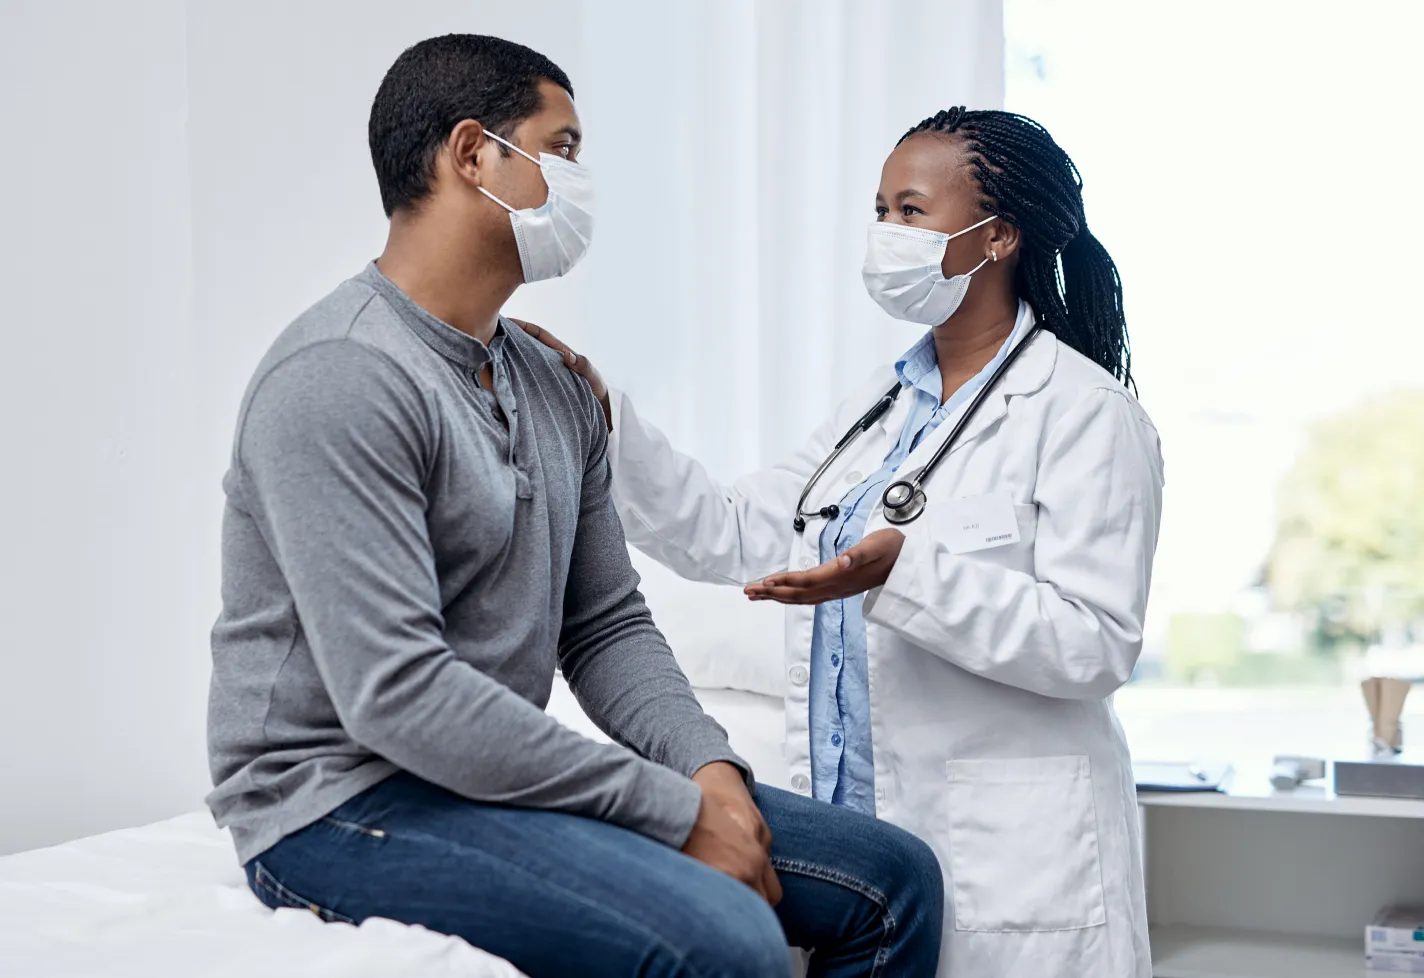 A doctor and patient are both wearing masks during their visit. The patient is sitting on the exam table as the provider is talking and resting her hand on his shoulder. 